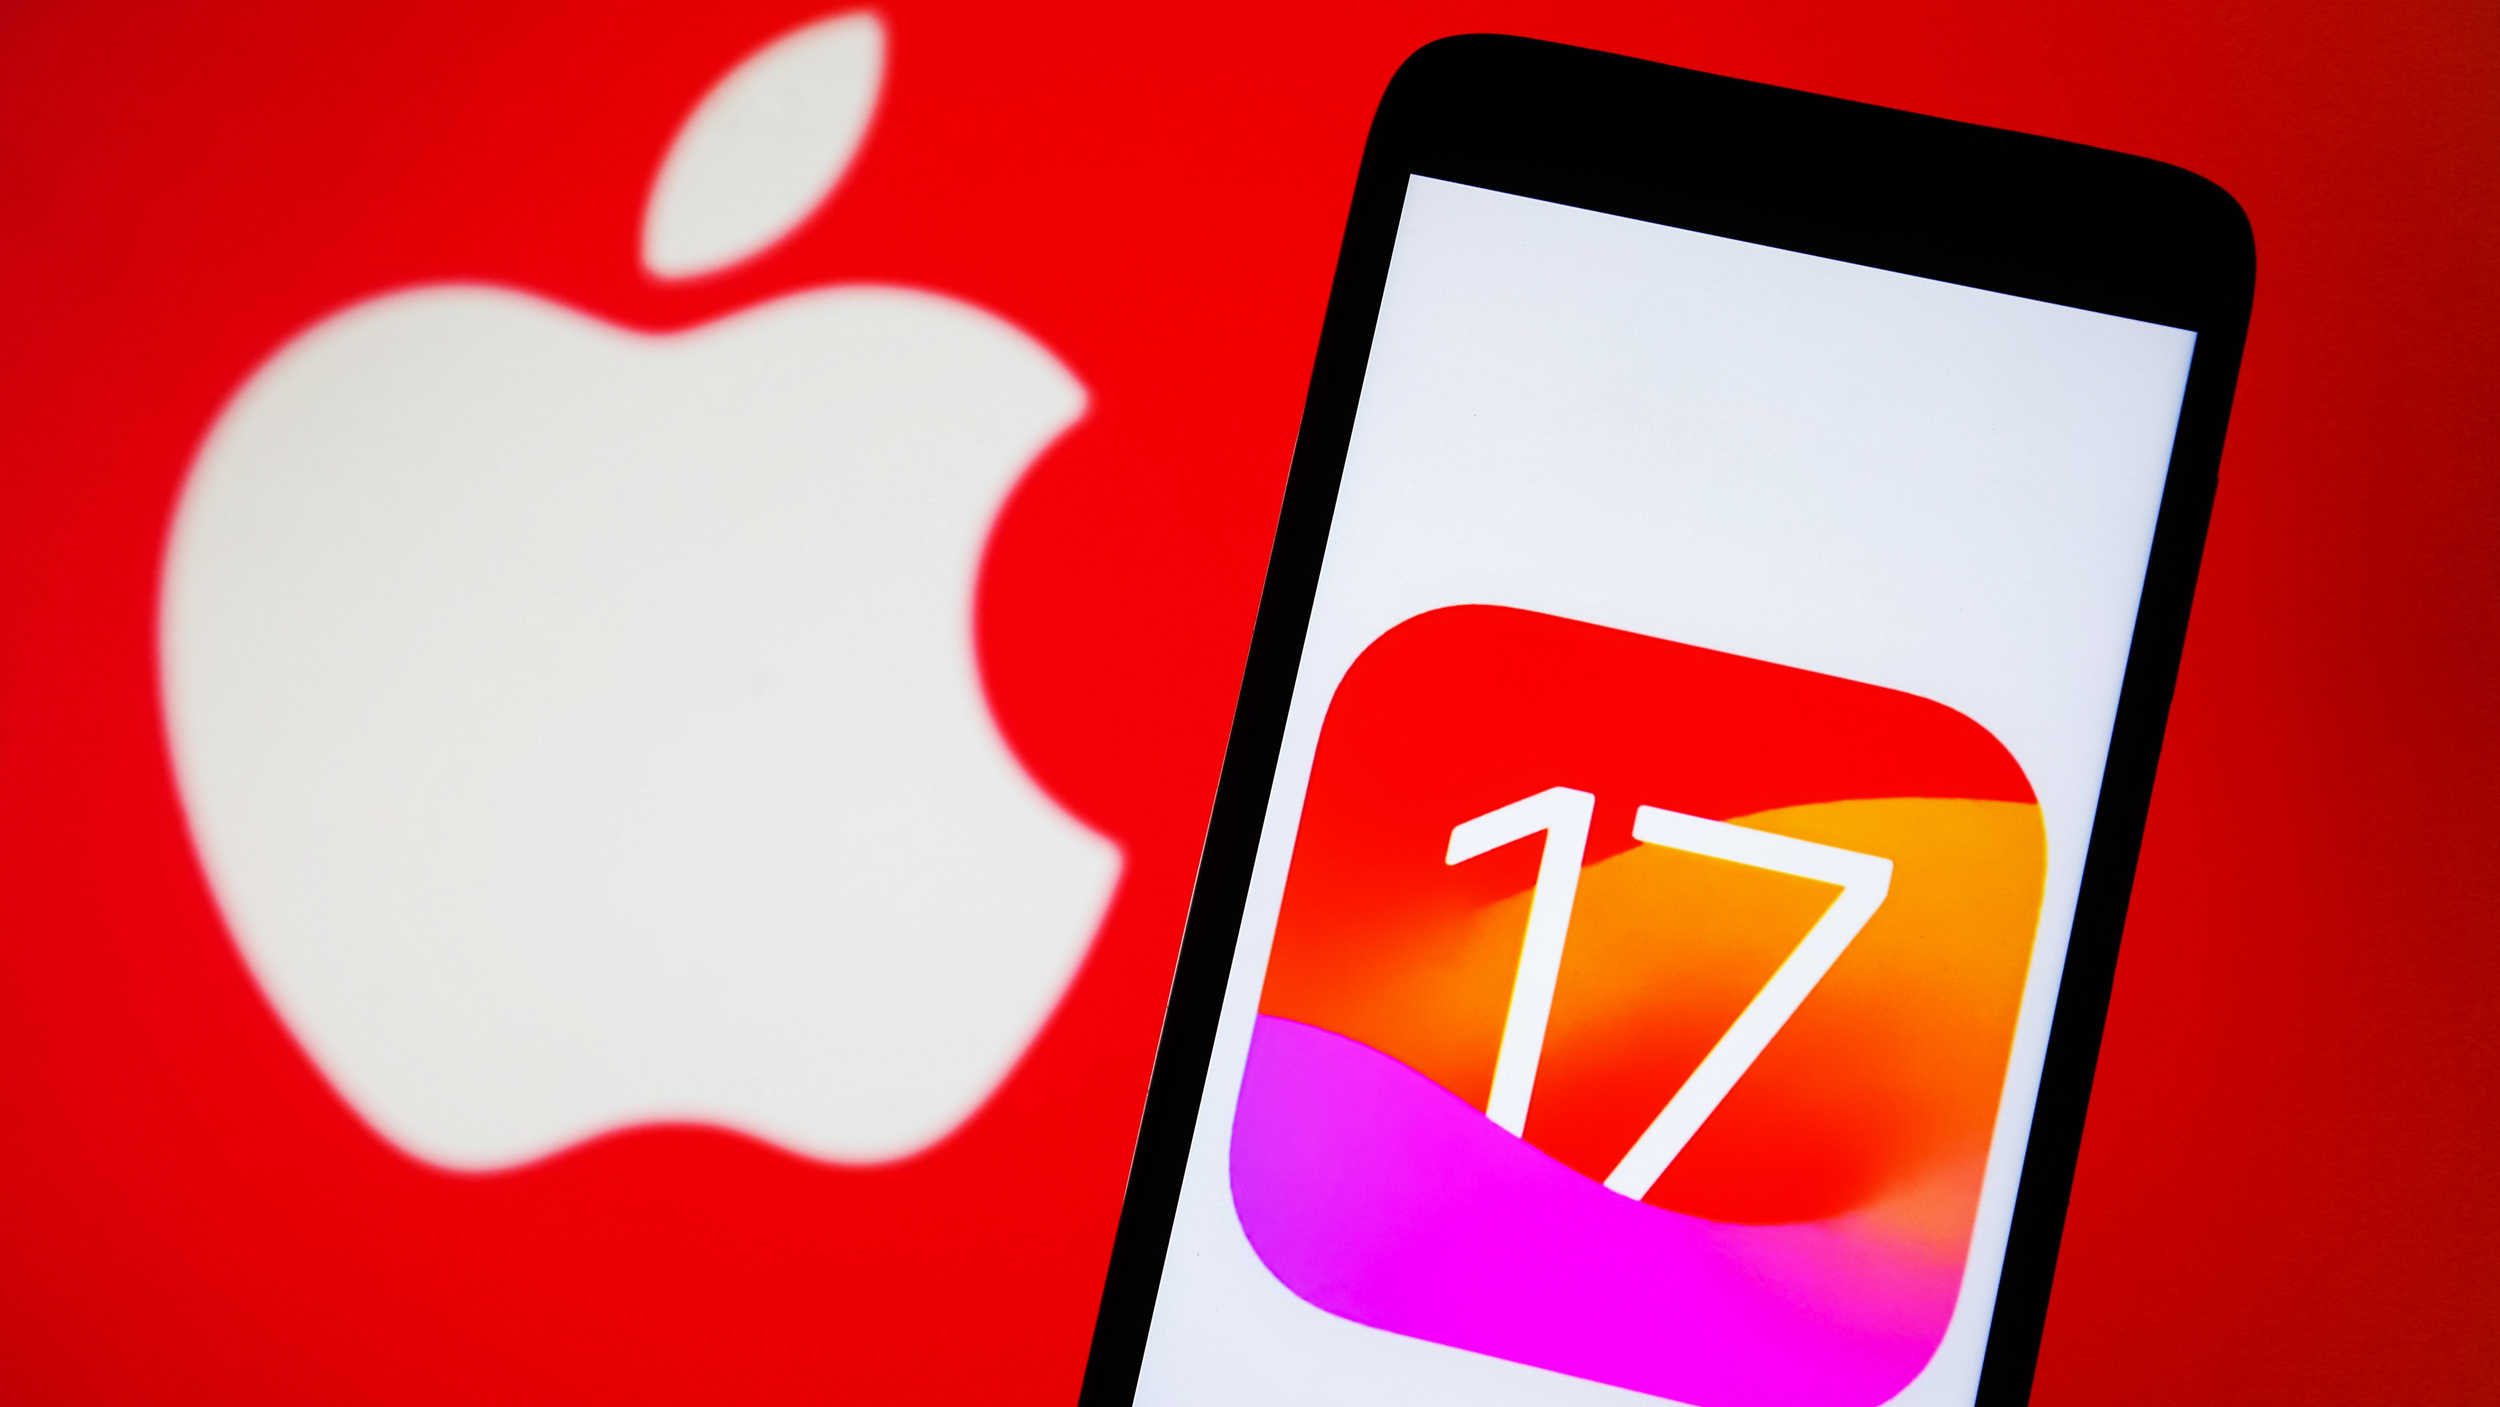 Apple iOS 17 to be released on September 18